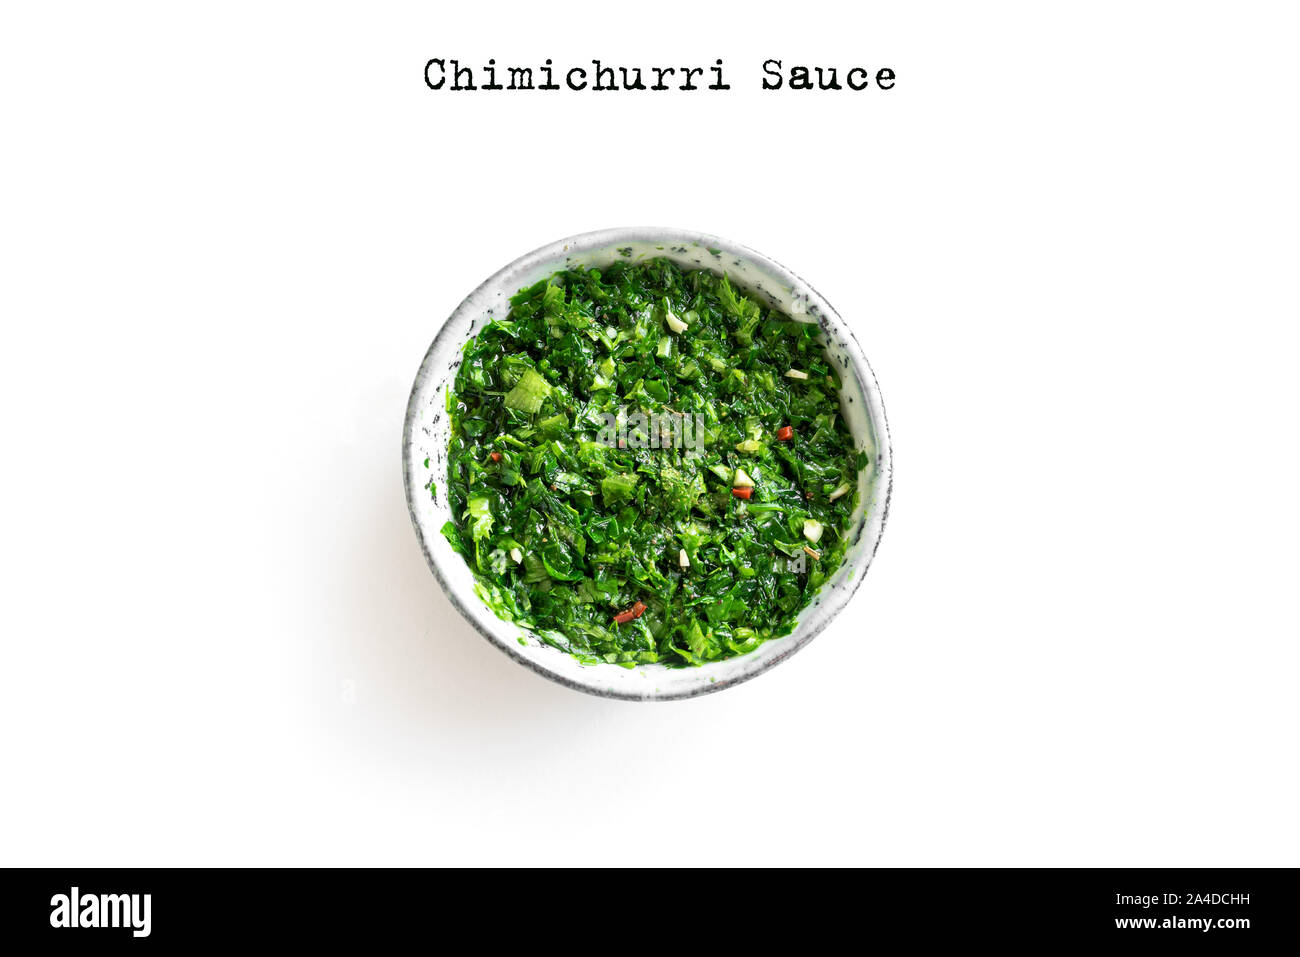 Raw homemade chopped green Chimichurri or Chimmichurri sauce made of parsley, garlic, oregano, hot pepper, olive oil, vinegar, isolated on white, top Stock Photo